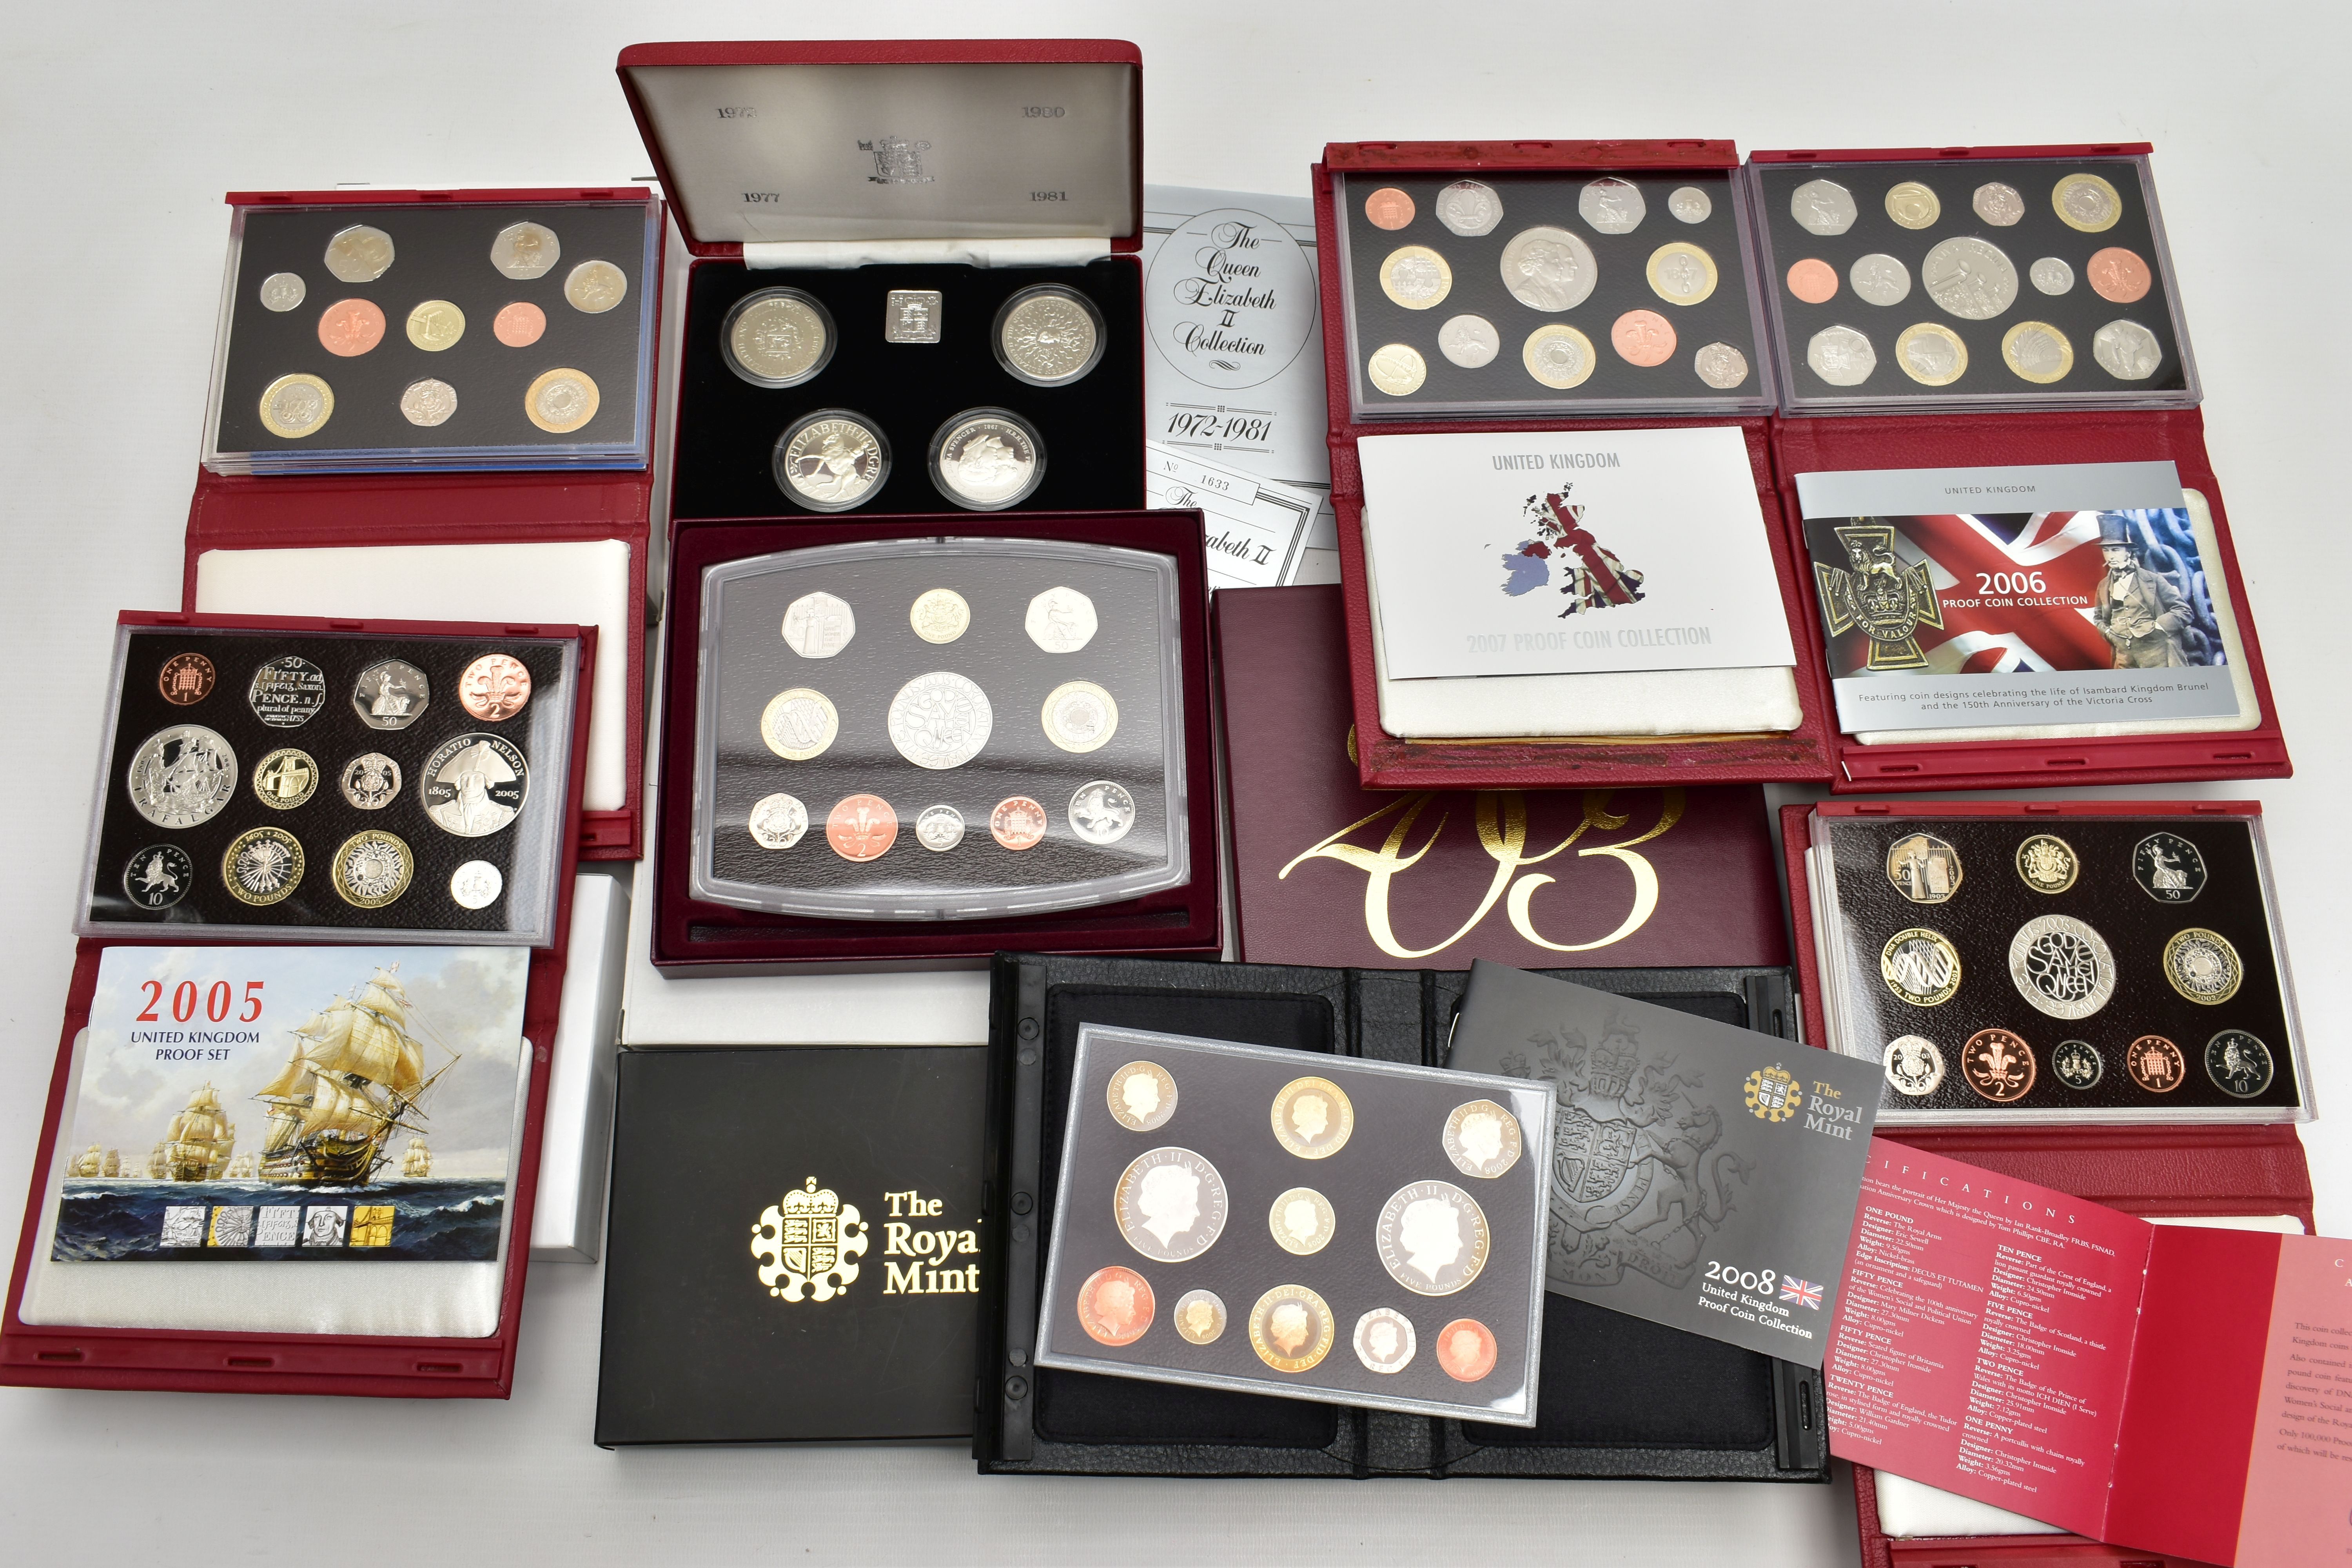 A ROYAL MINT QUEEN ELIZABETH II 1972-1981 SILVER PROOF CROWN COLLECTION, of four silver proof coins,